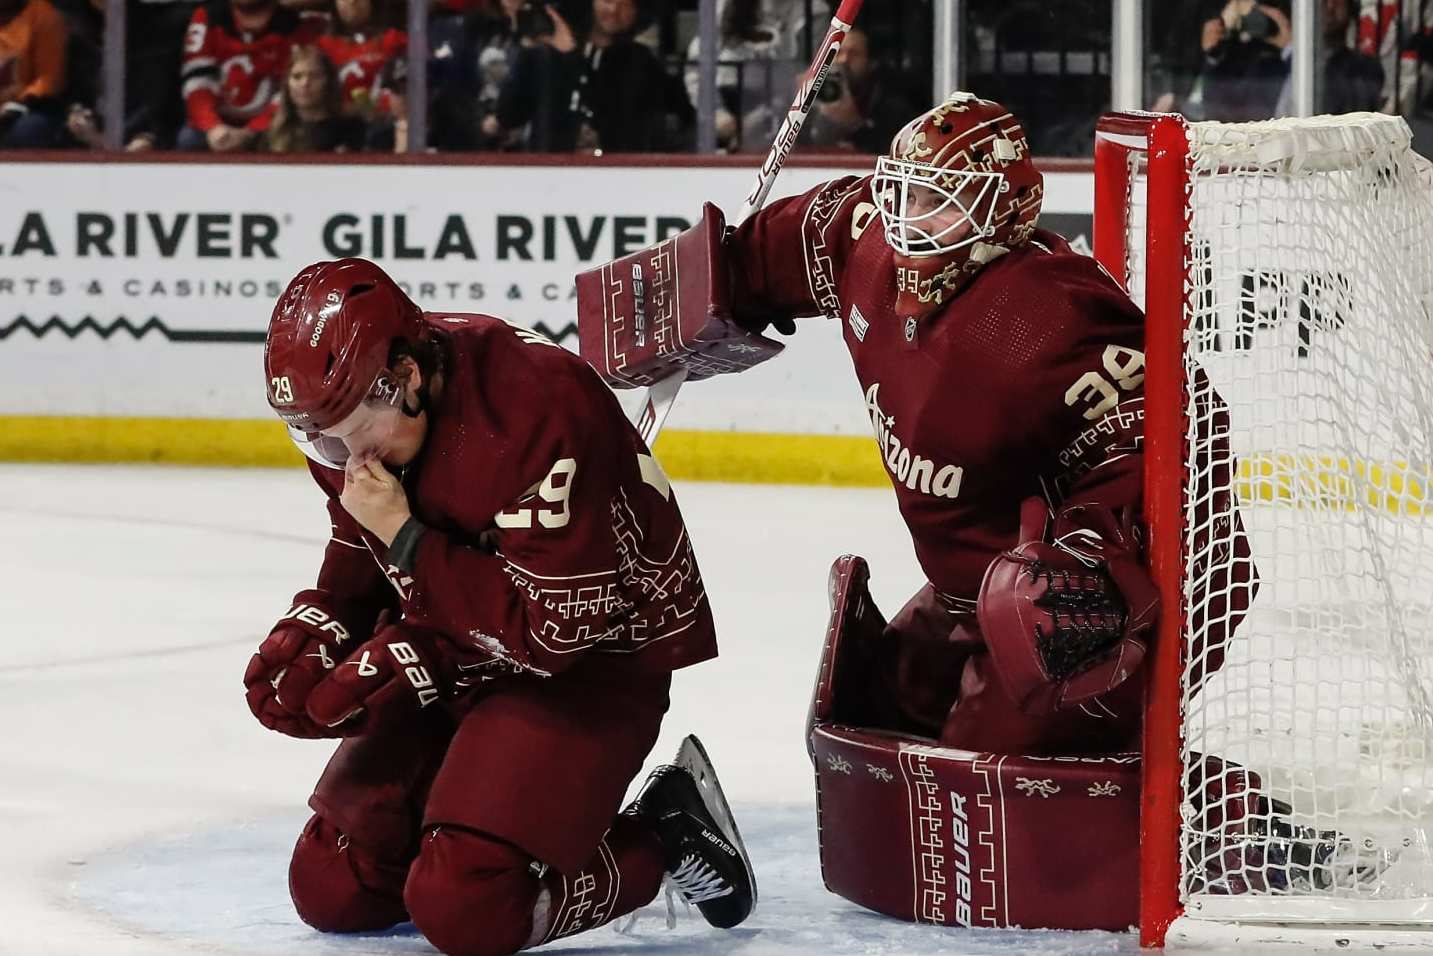 Yotes Trade Central on X: It appears this is close to what the